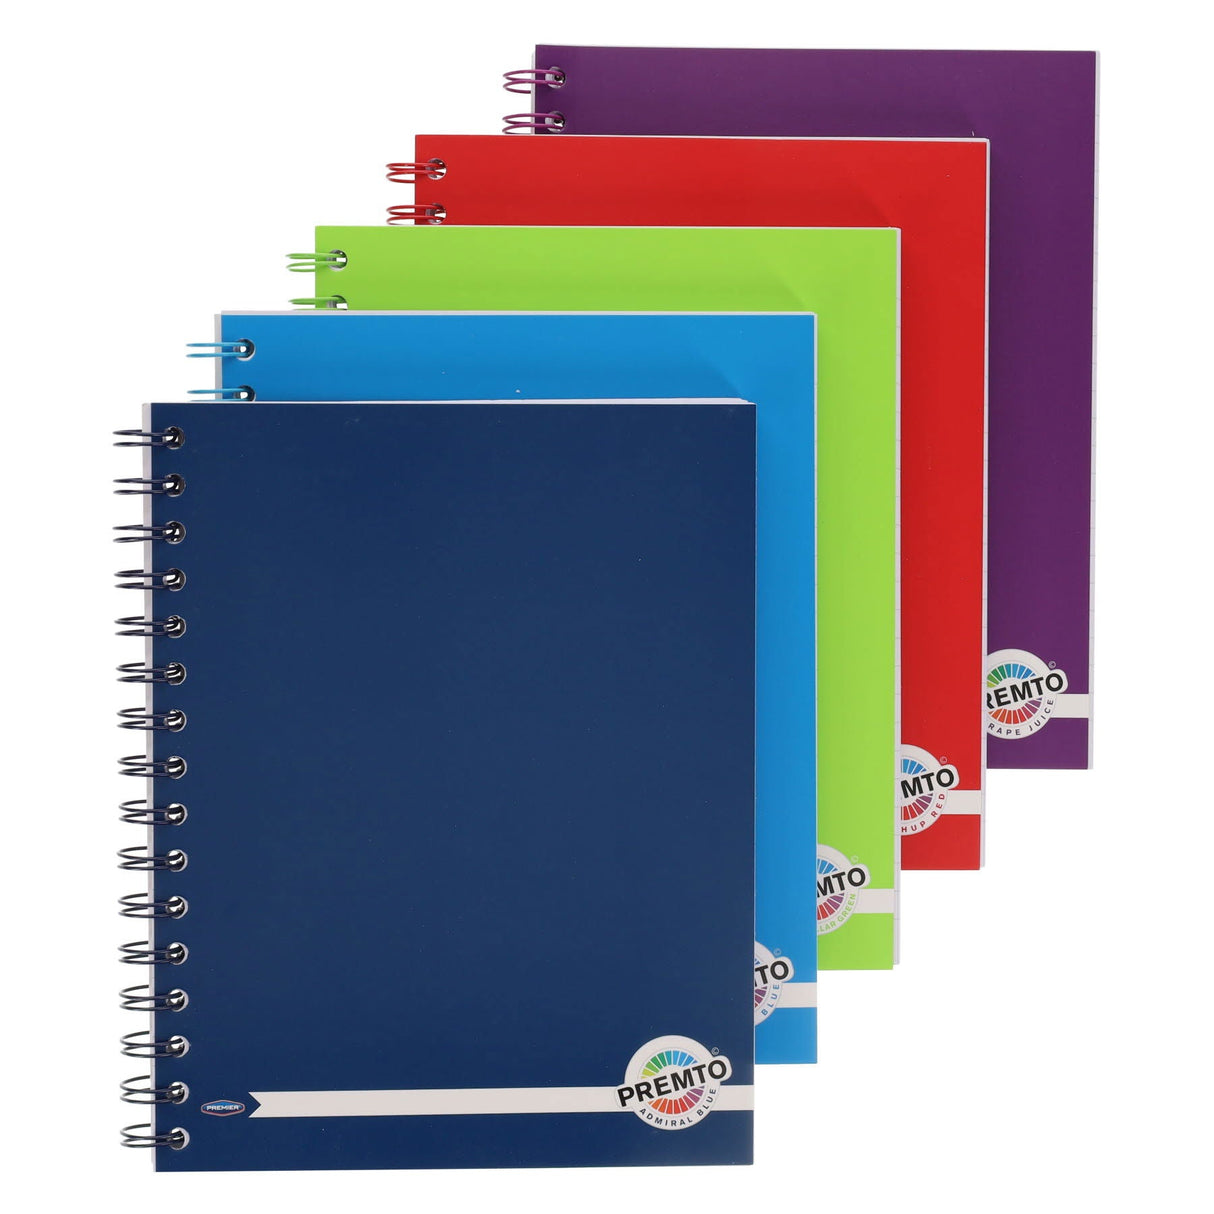 Premto A5 Wiro Notebook - 200 Pages - Printer Blue | Stationery Shop UK